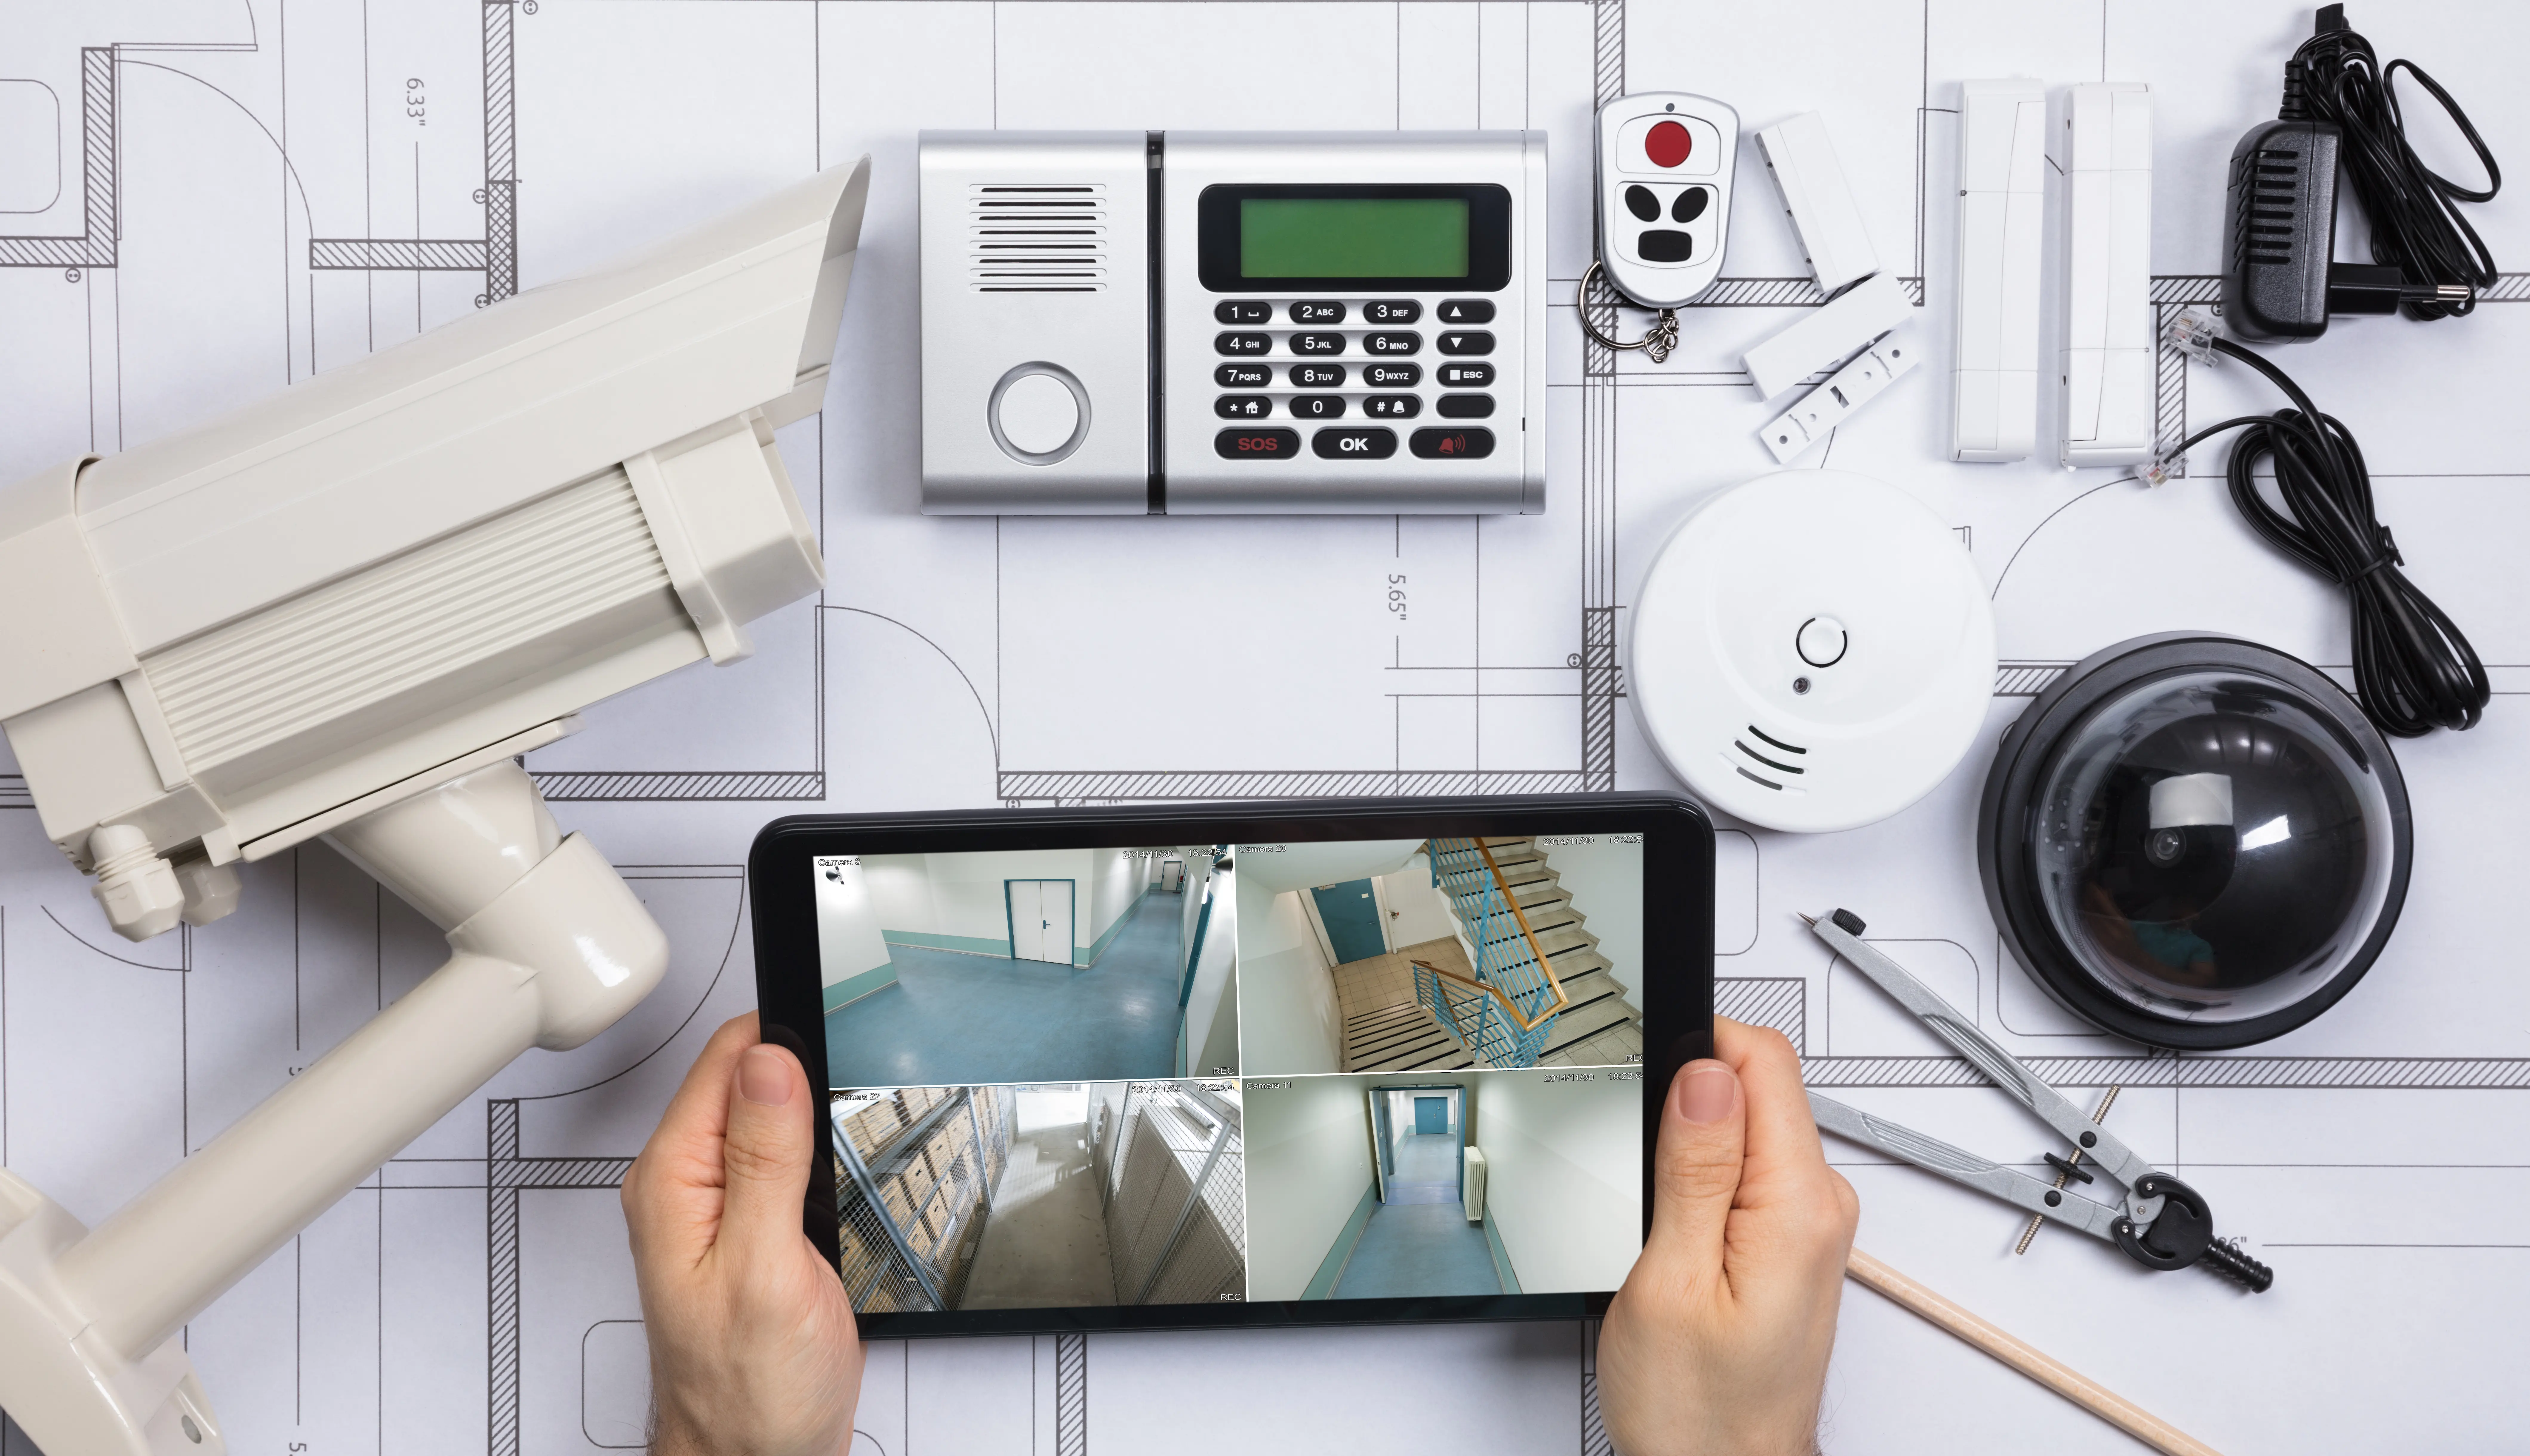 Image shows a security systems like CCTV, Fire Alarm, Carbon Monoxide Alarm, Burglar Alarm and remote locking device on a table with project drawings.